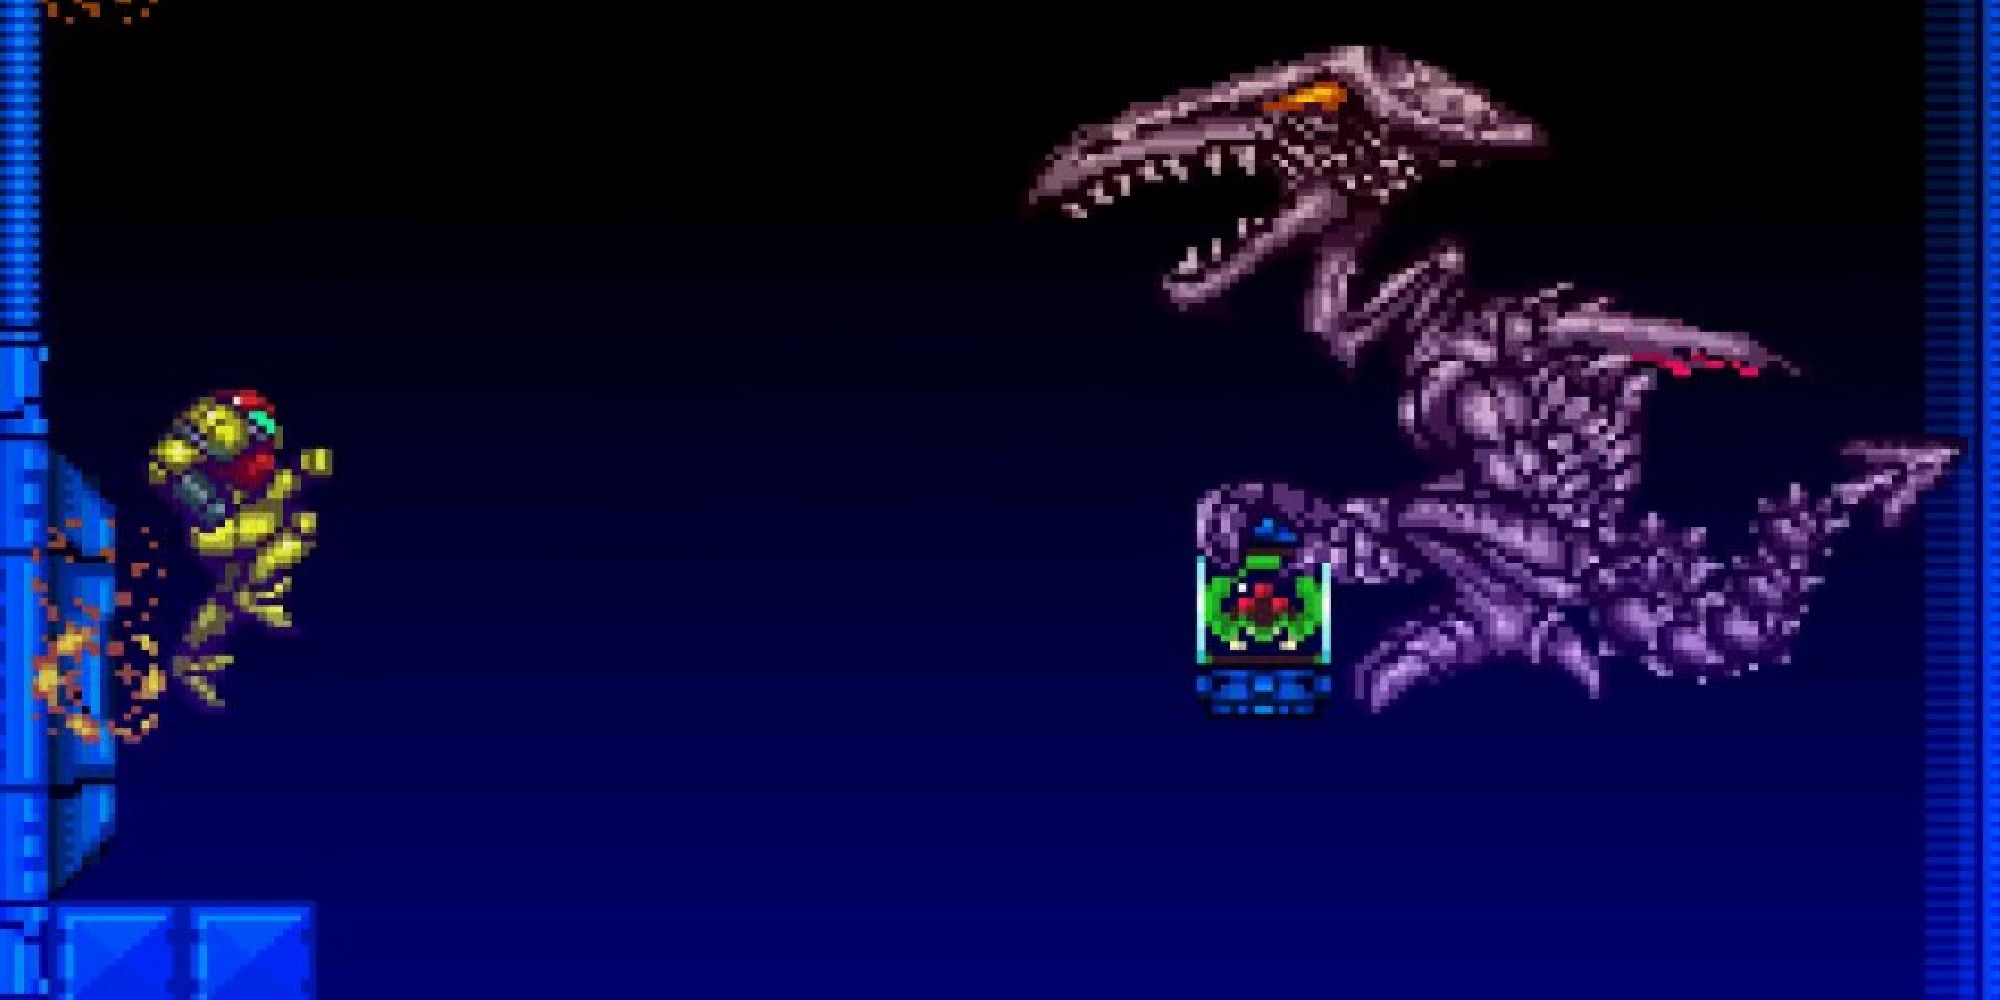 Samus attacking Ridley in Super Metroid after he's kidnapped the Baby